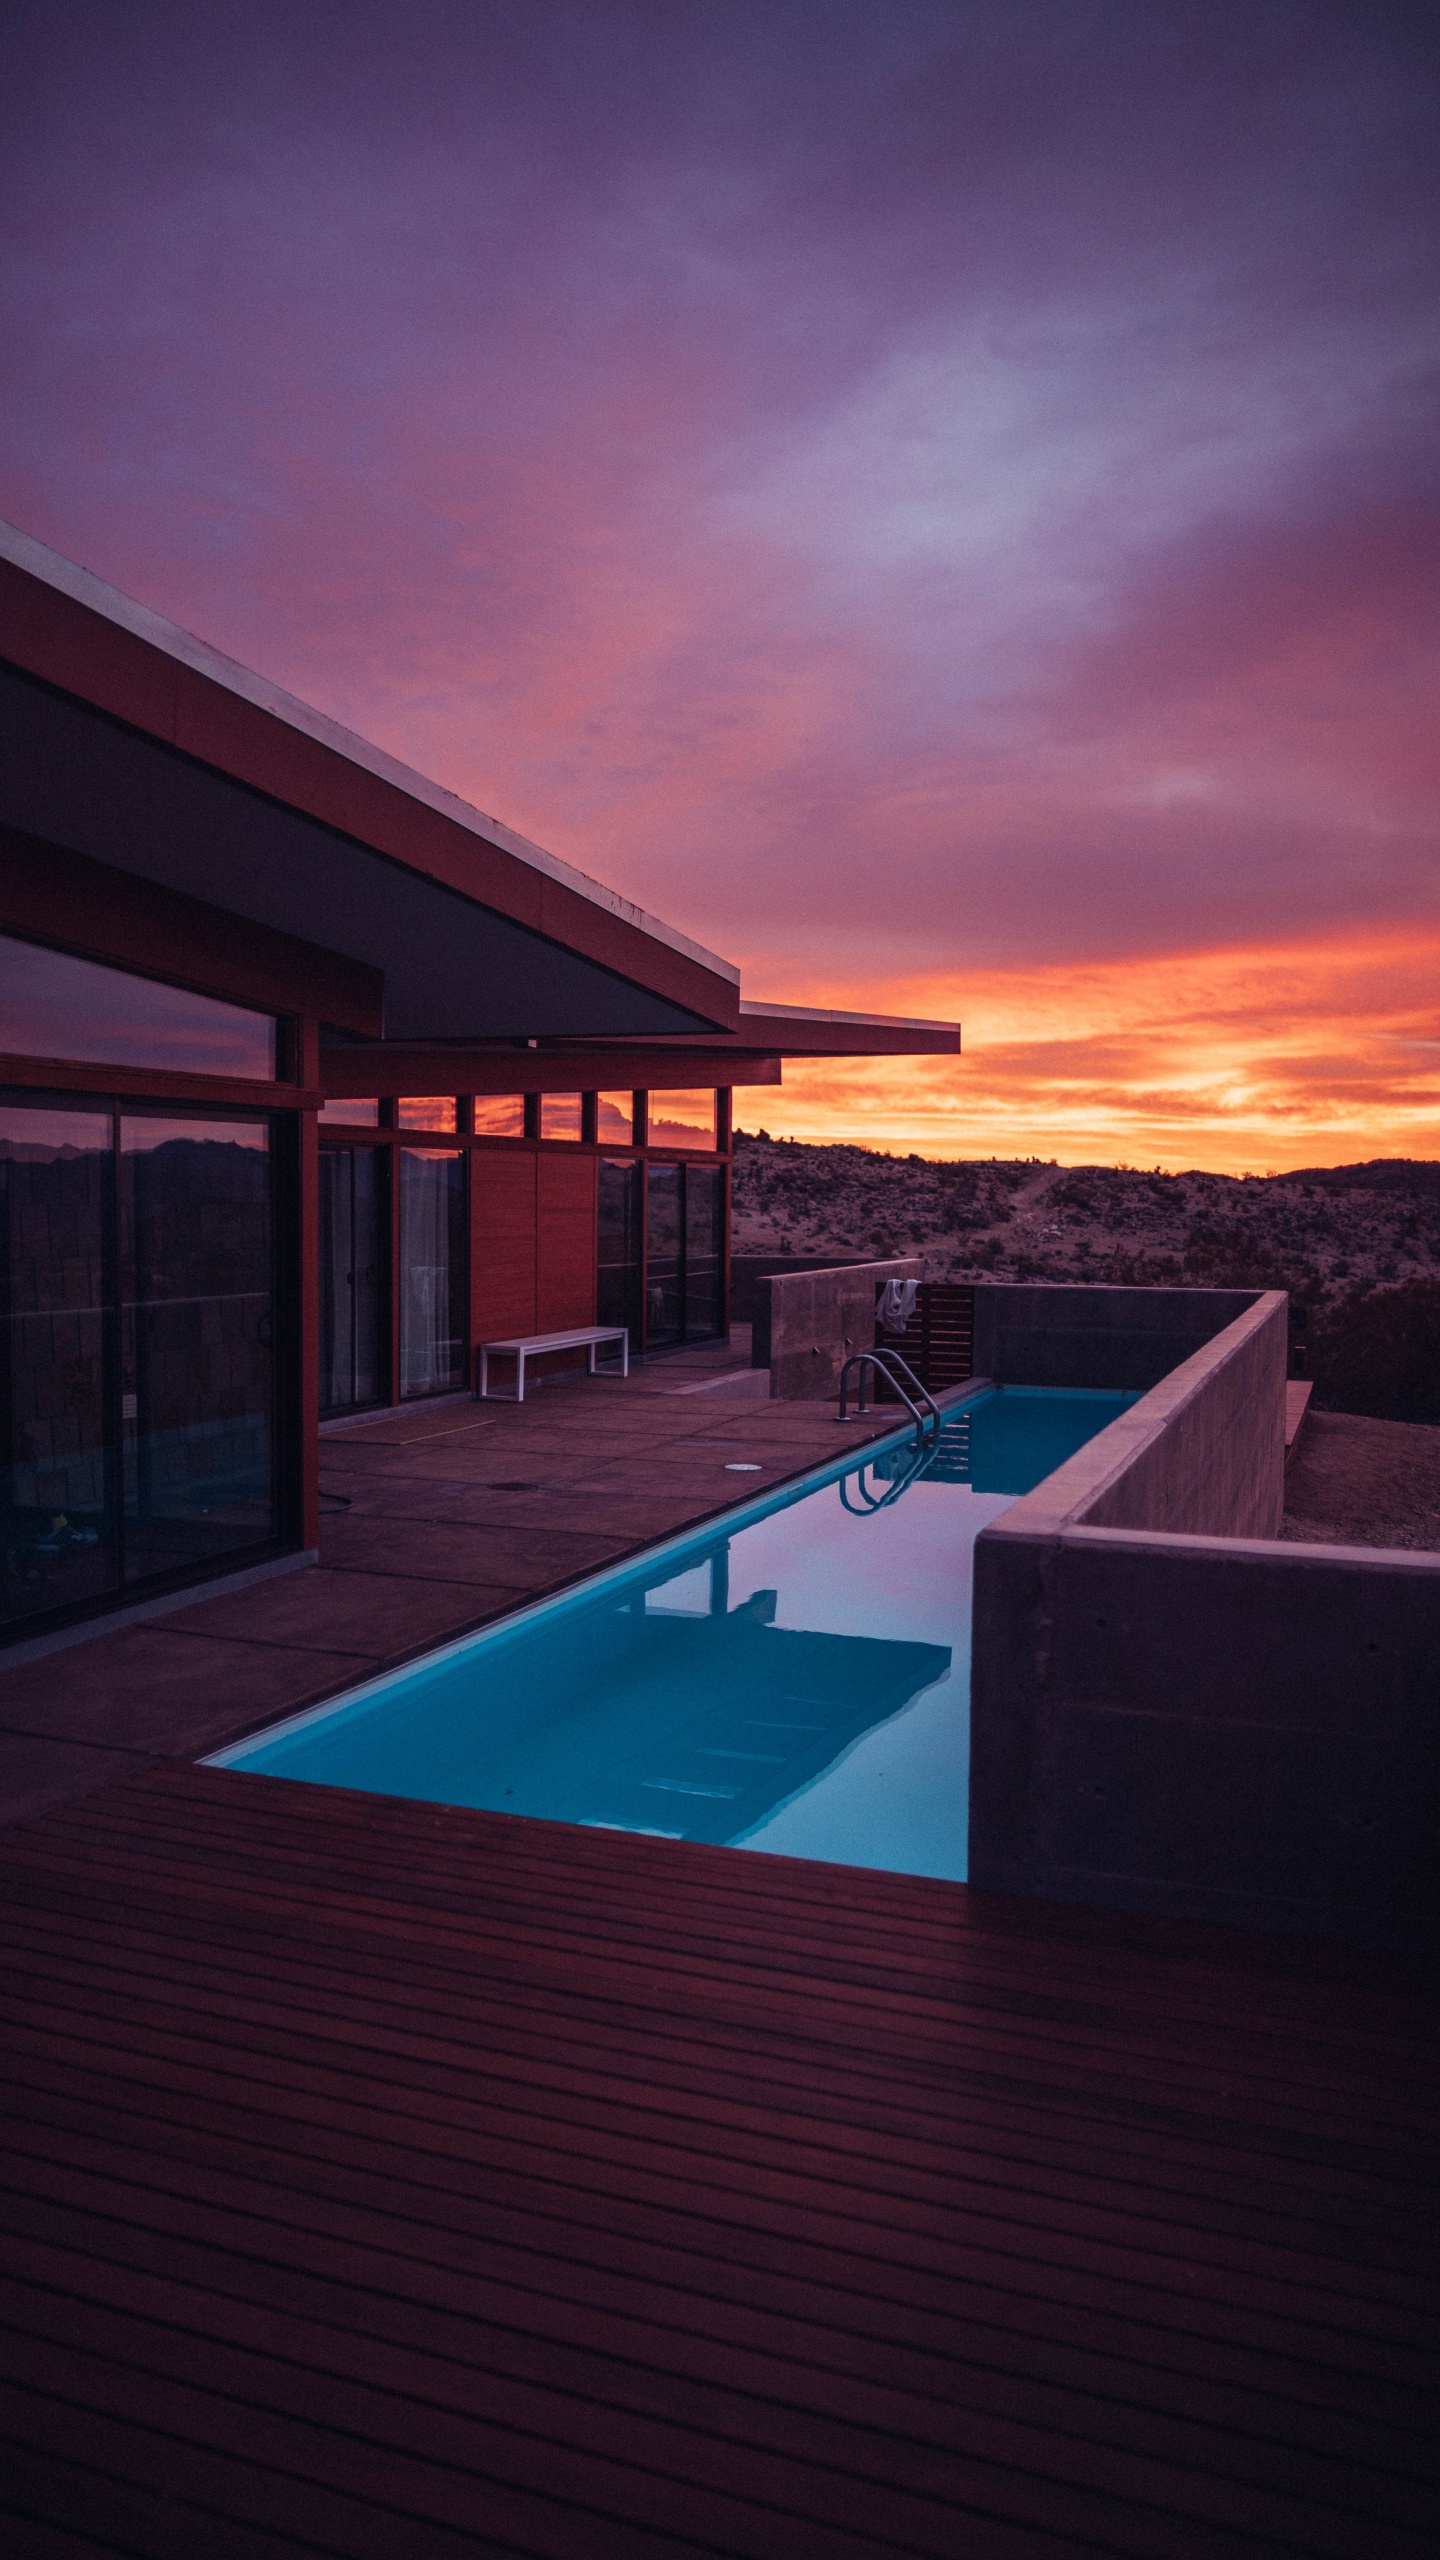 Swimming Pool Near Brown Wooden House During Sunset. Wallpaper in 1440x2560 Resolution